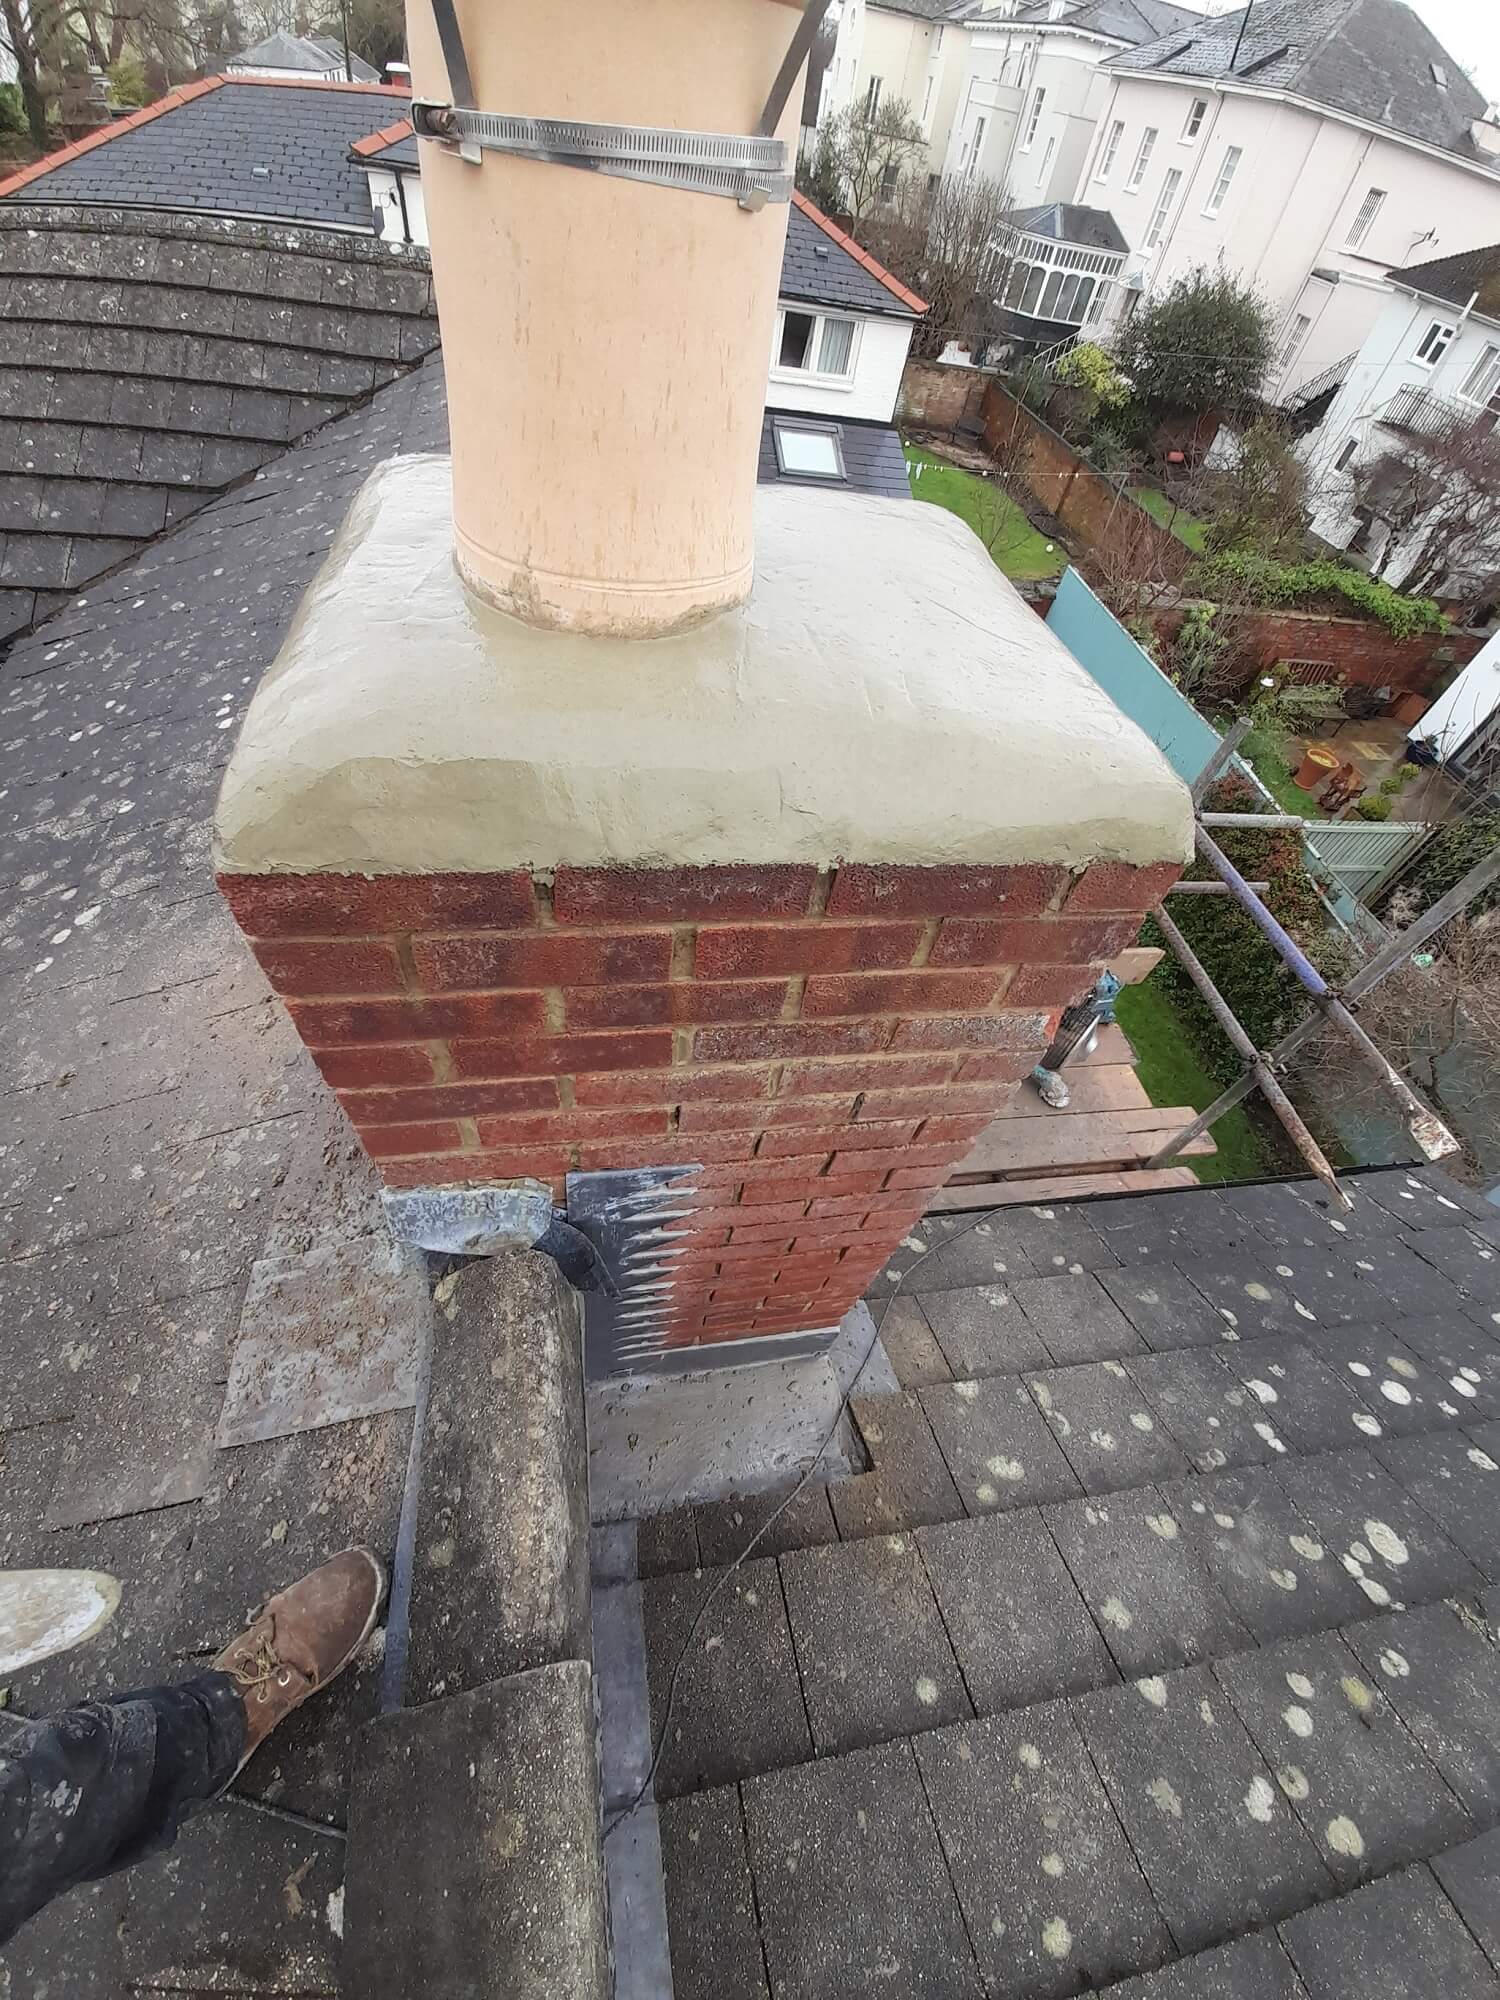 Fascias, soffits, and guttering systems